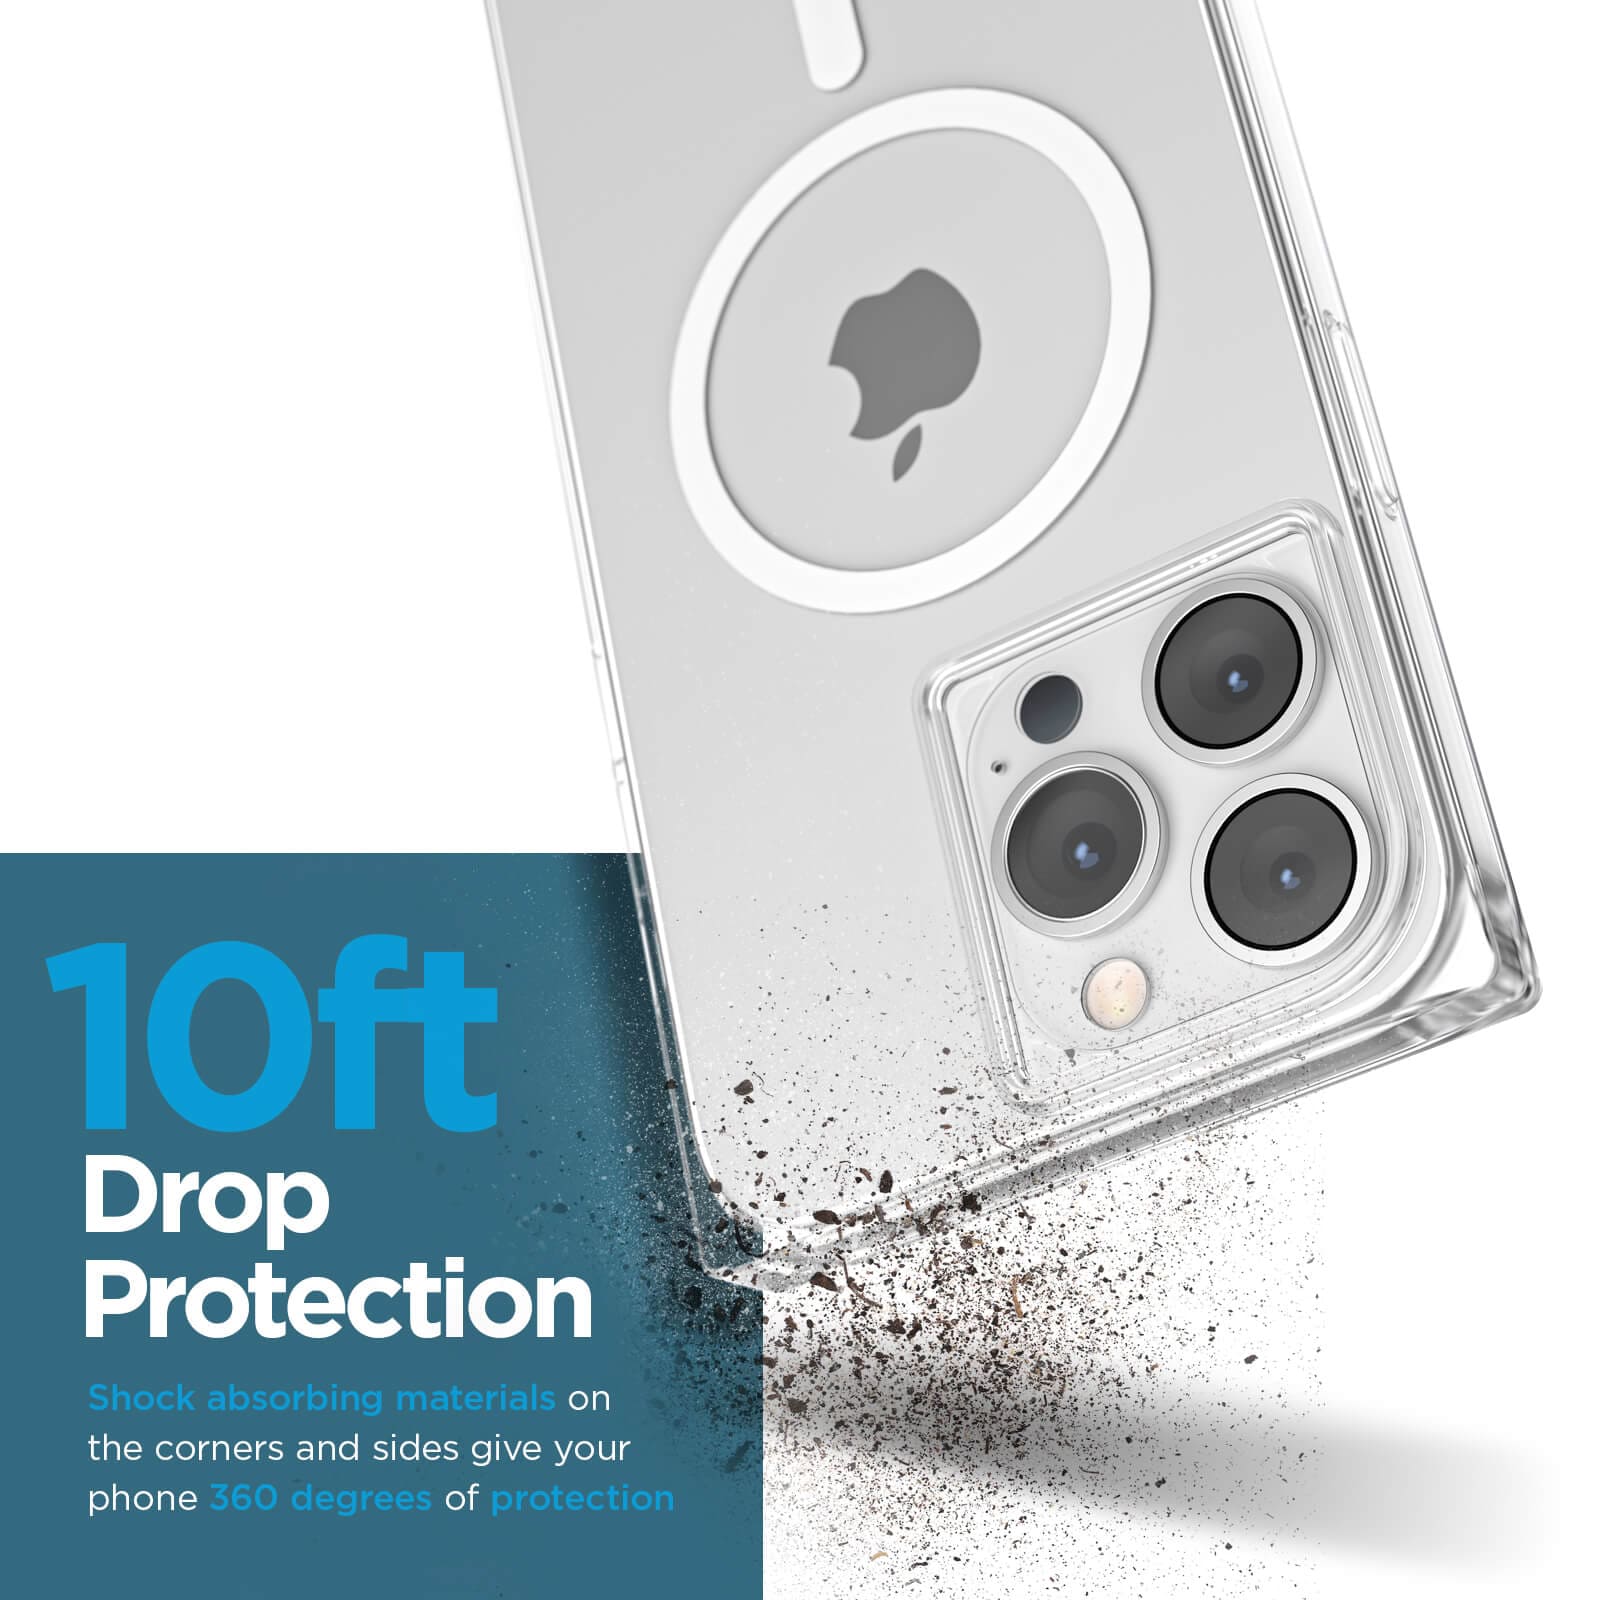 10ft drop protection. Shock absorbing materials on the corners and sides give your phone 360 degrees of protection. color::Clear